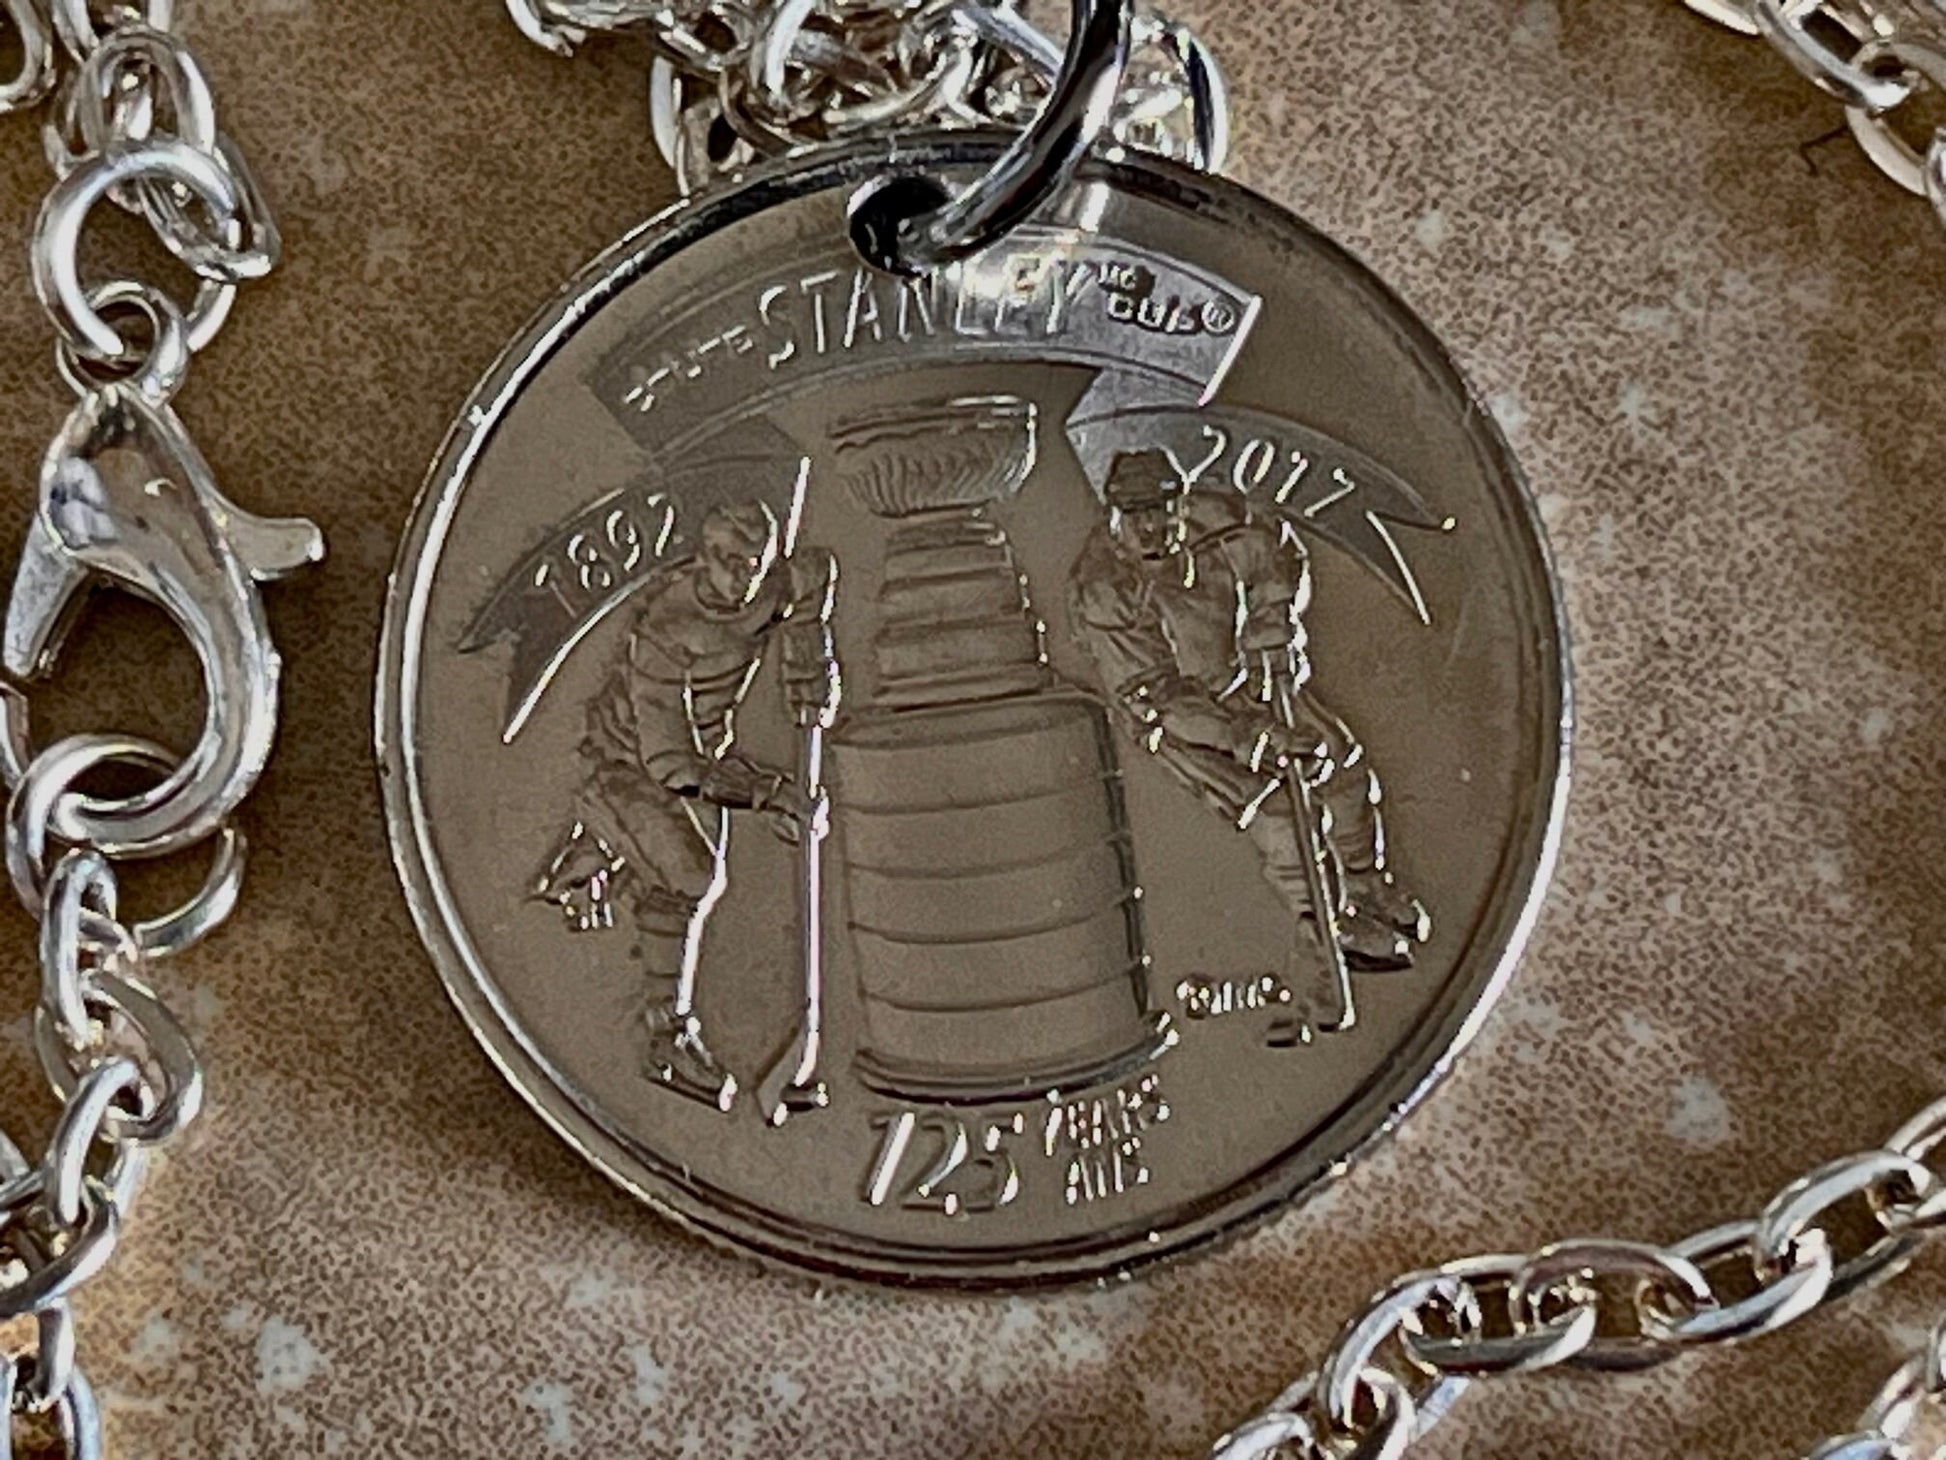 Canadian Quarter Necklace Pendant Canada NHL 125 Years Men's Hockey Personal Jewelry Gift Friend Charm For Him Her World Coin Collector